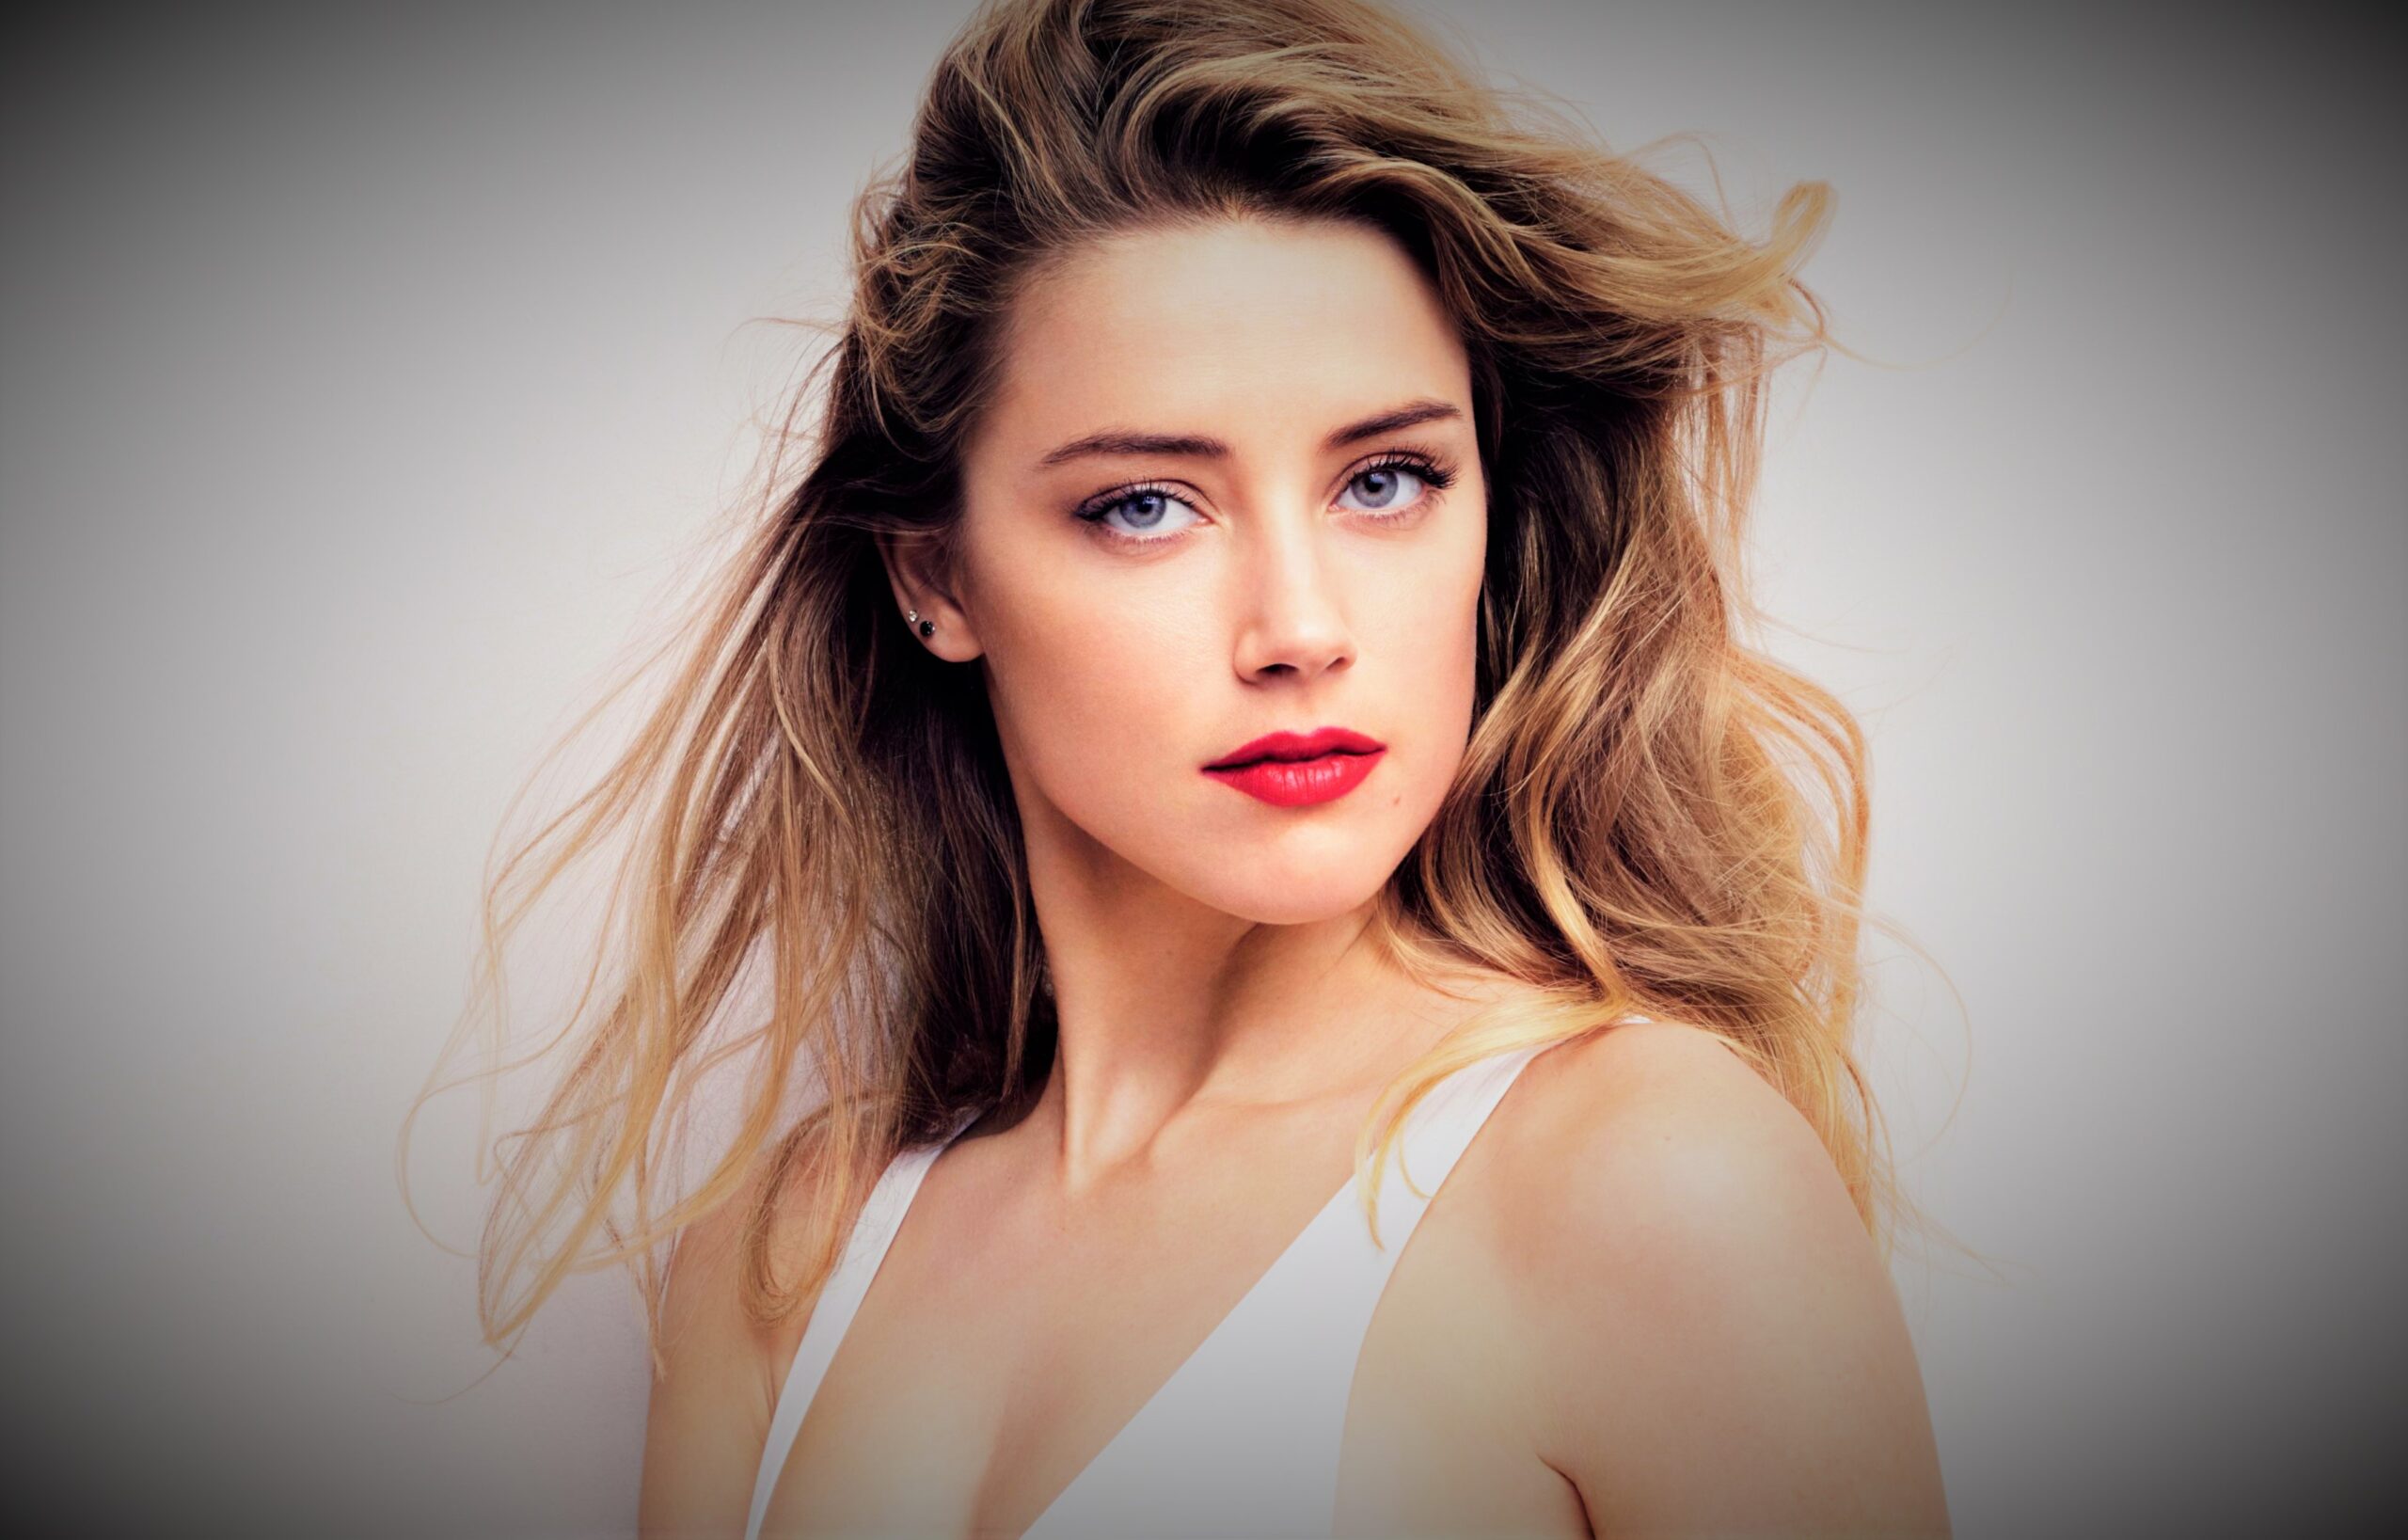 The American actress Amber Heard latest picture.